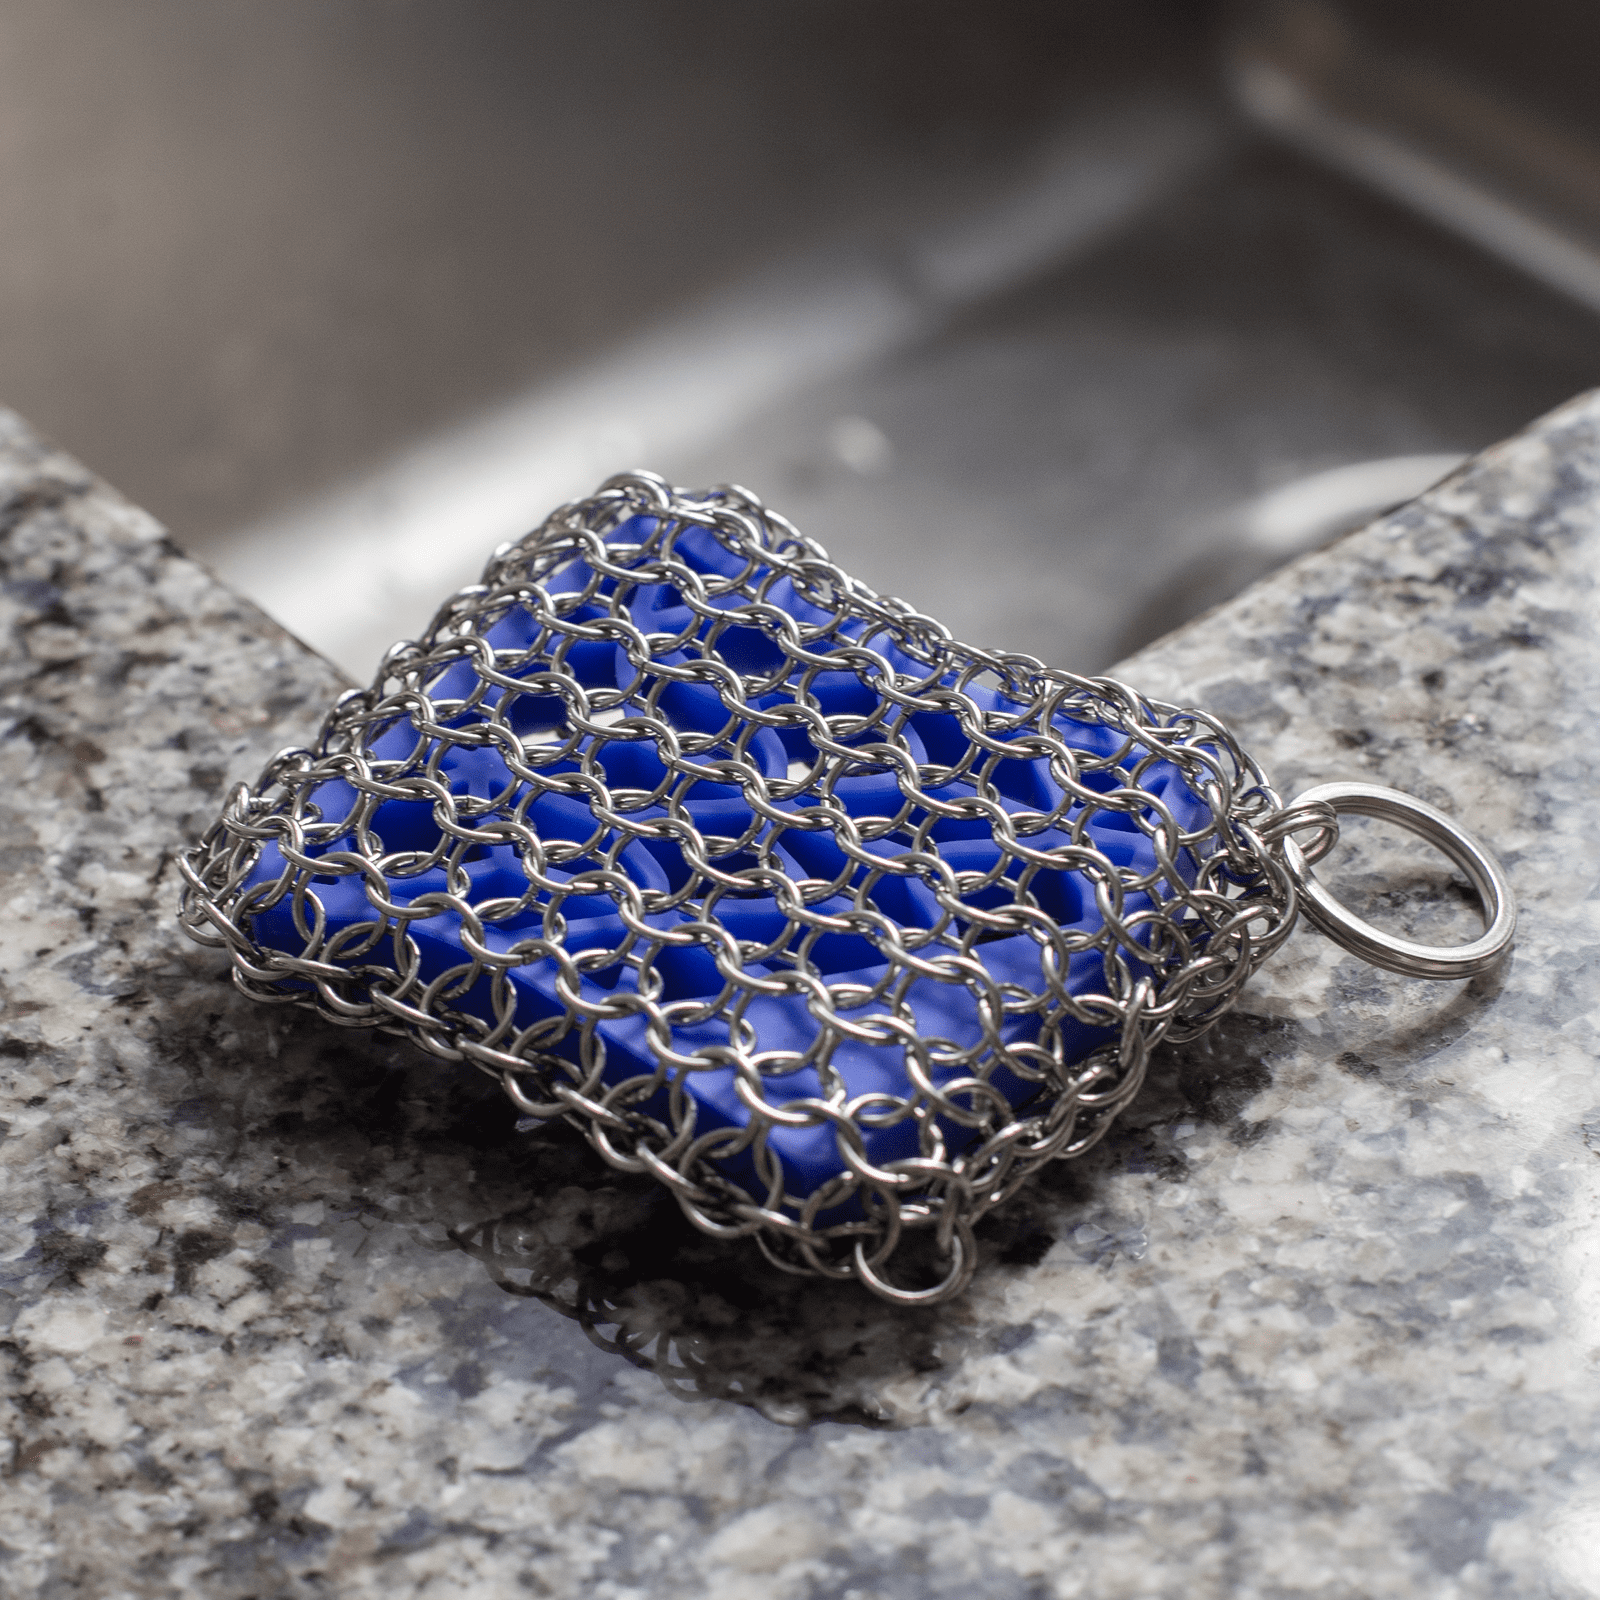 Lodge Chainmail Heavy Duty Scrubbing Pad For Cast Iron 8.71 in